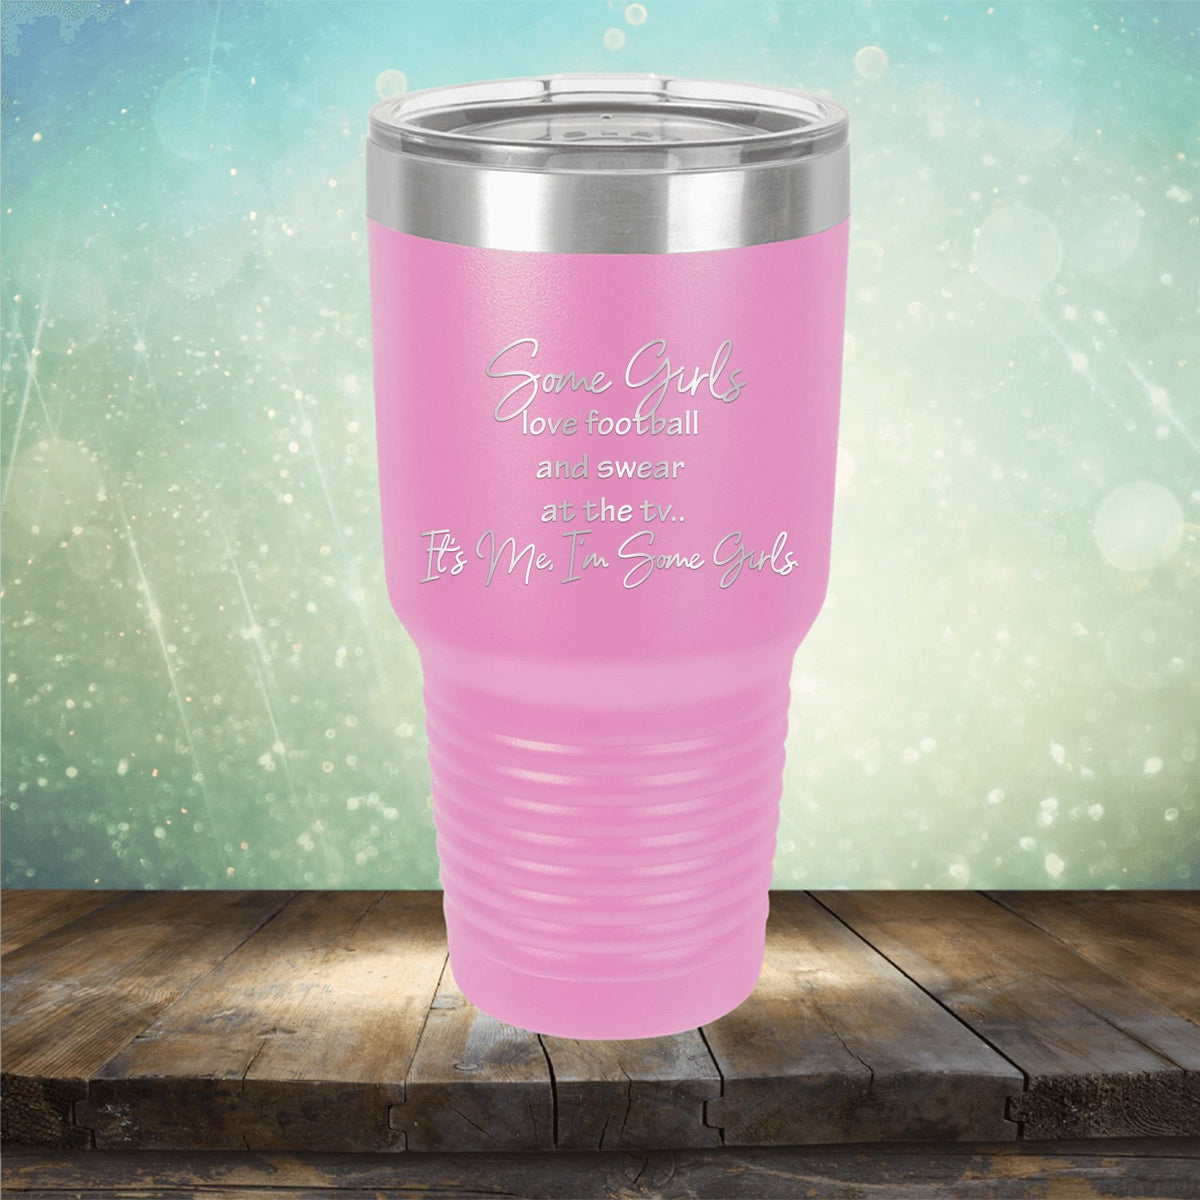 Some Girls Love Football and Swear at the TV It&#39;s Me I&#39;m Some Girls - Laser Etched Tumbler Mug